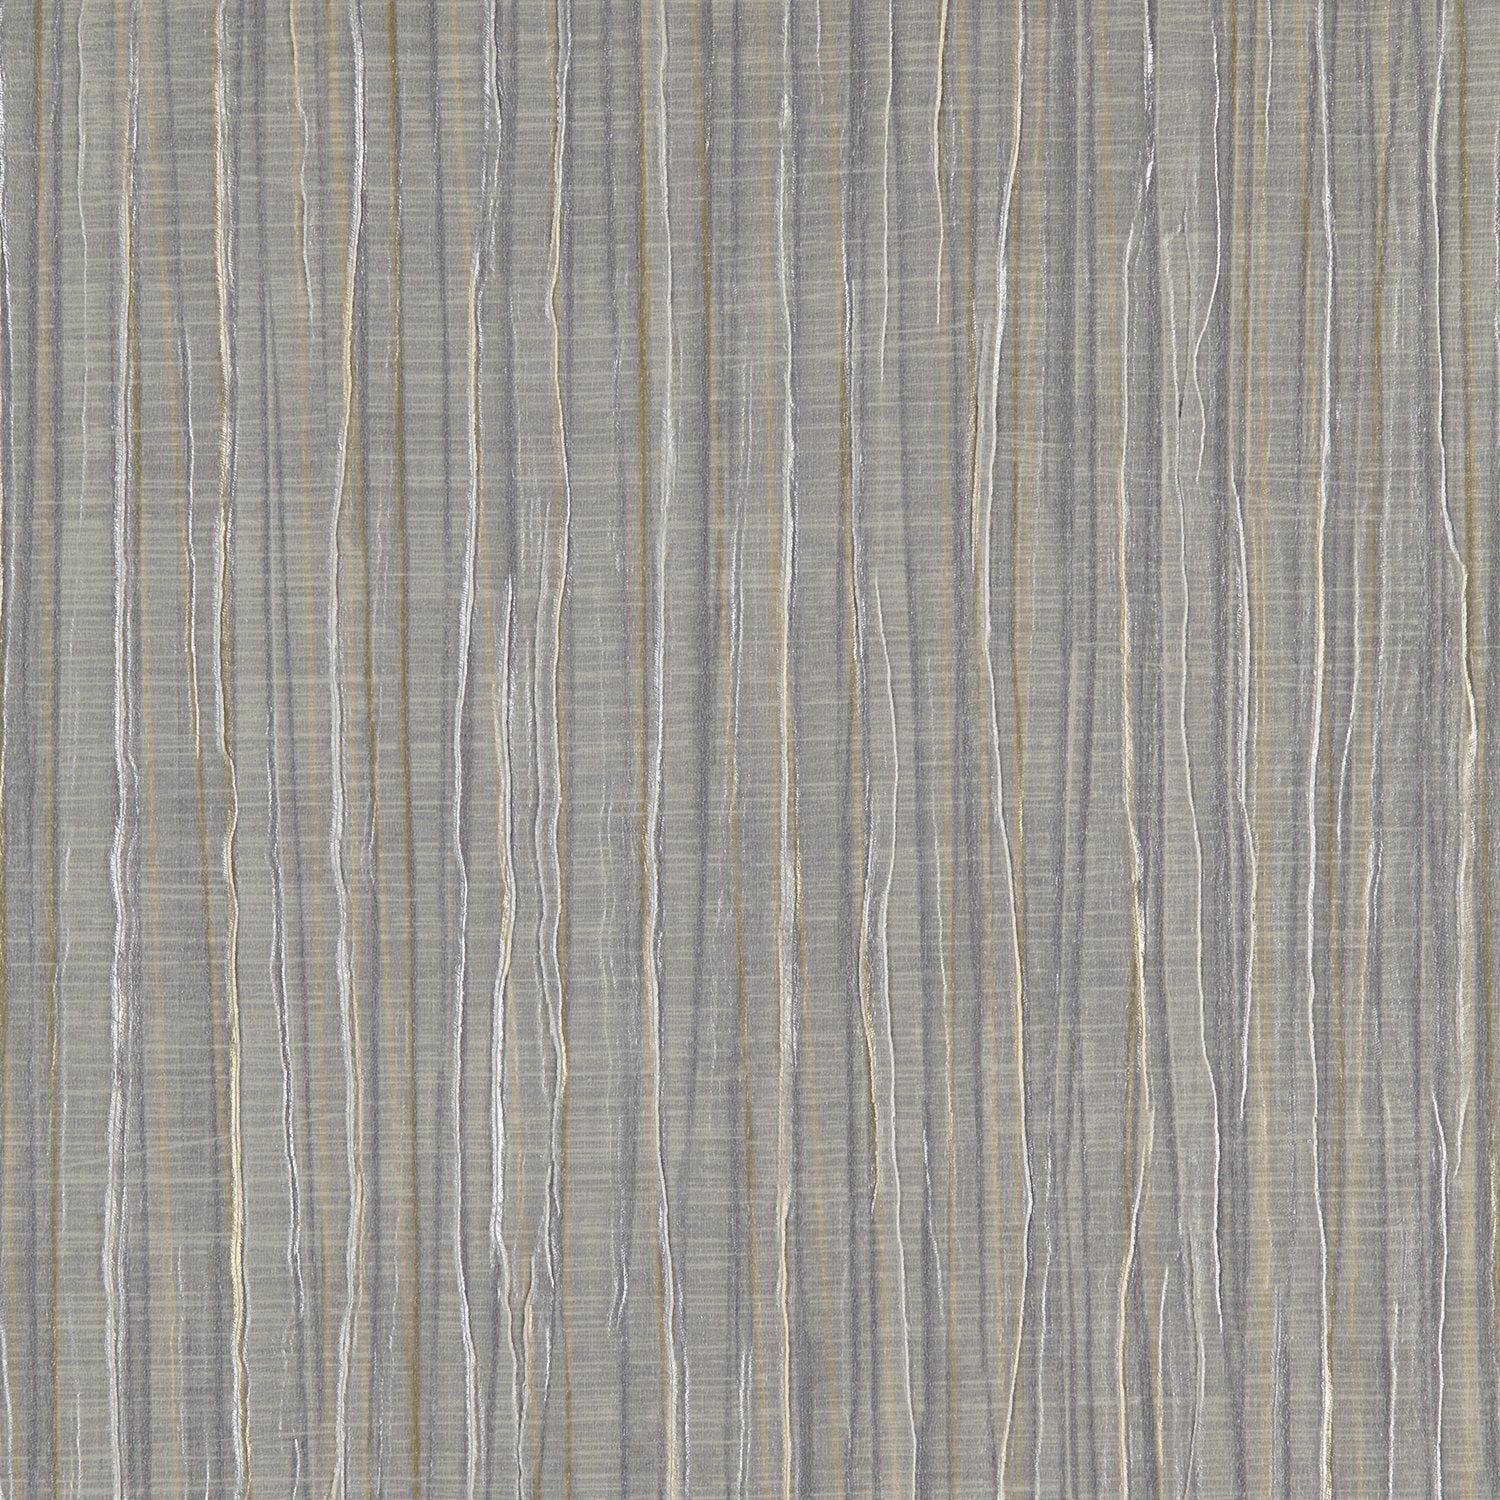 Vogue Pleat - Y47019 - Wallcovering - Vycon - Kube Contract